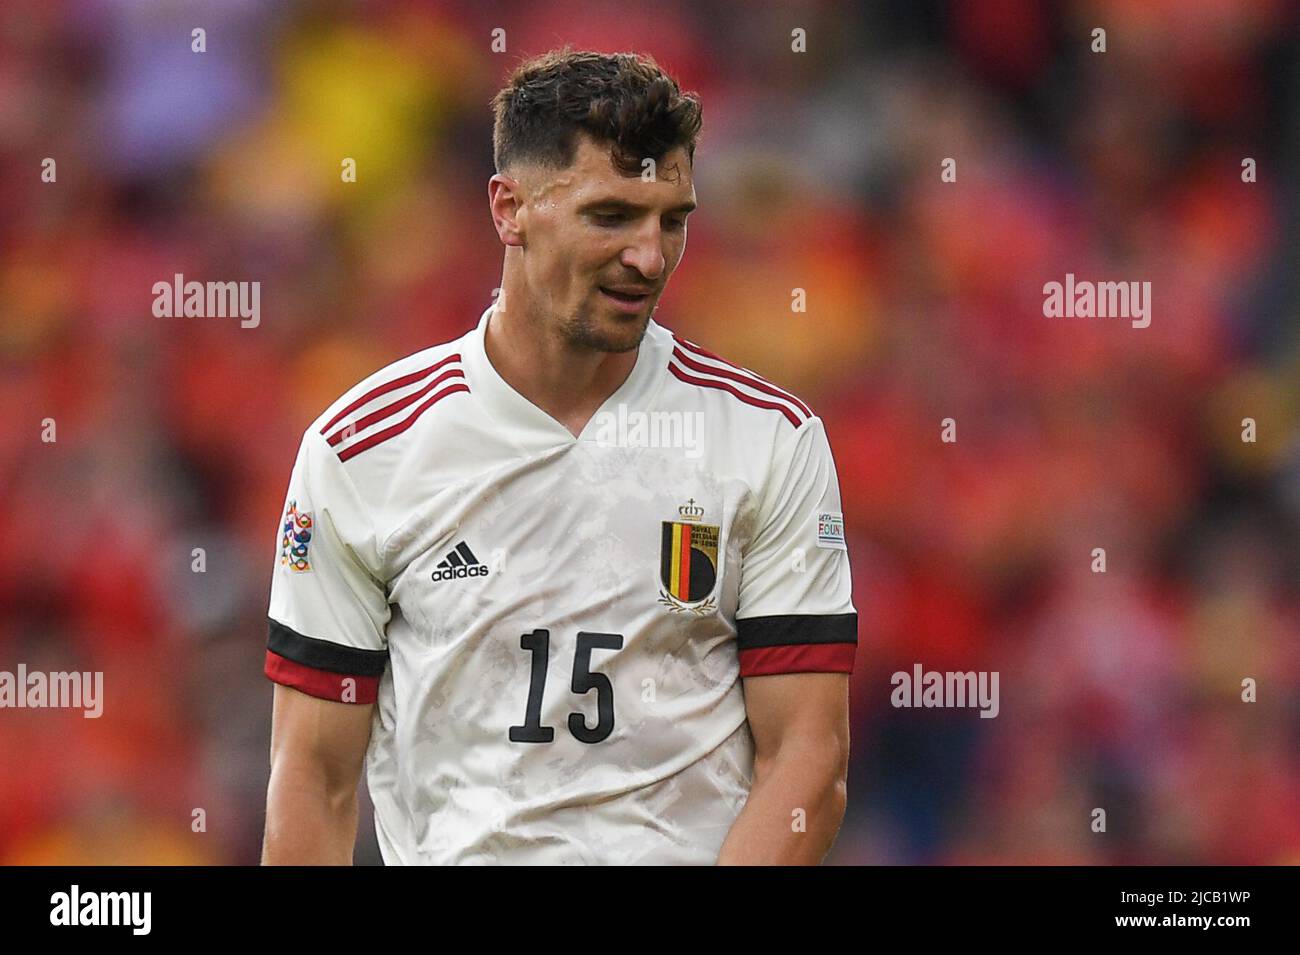 Cardiff, UK. 11th June, 2022. Thomas Meunier of Belgium, during the game Credit: News Images /Alamy Live News Stock Photo